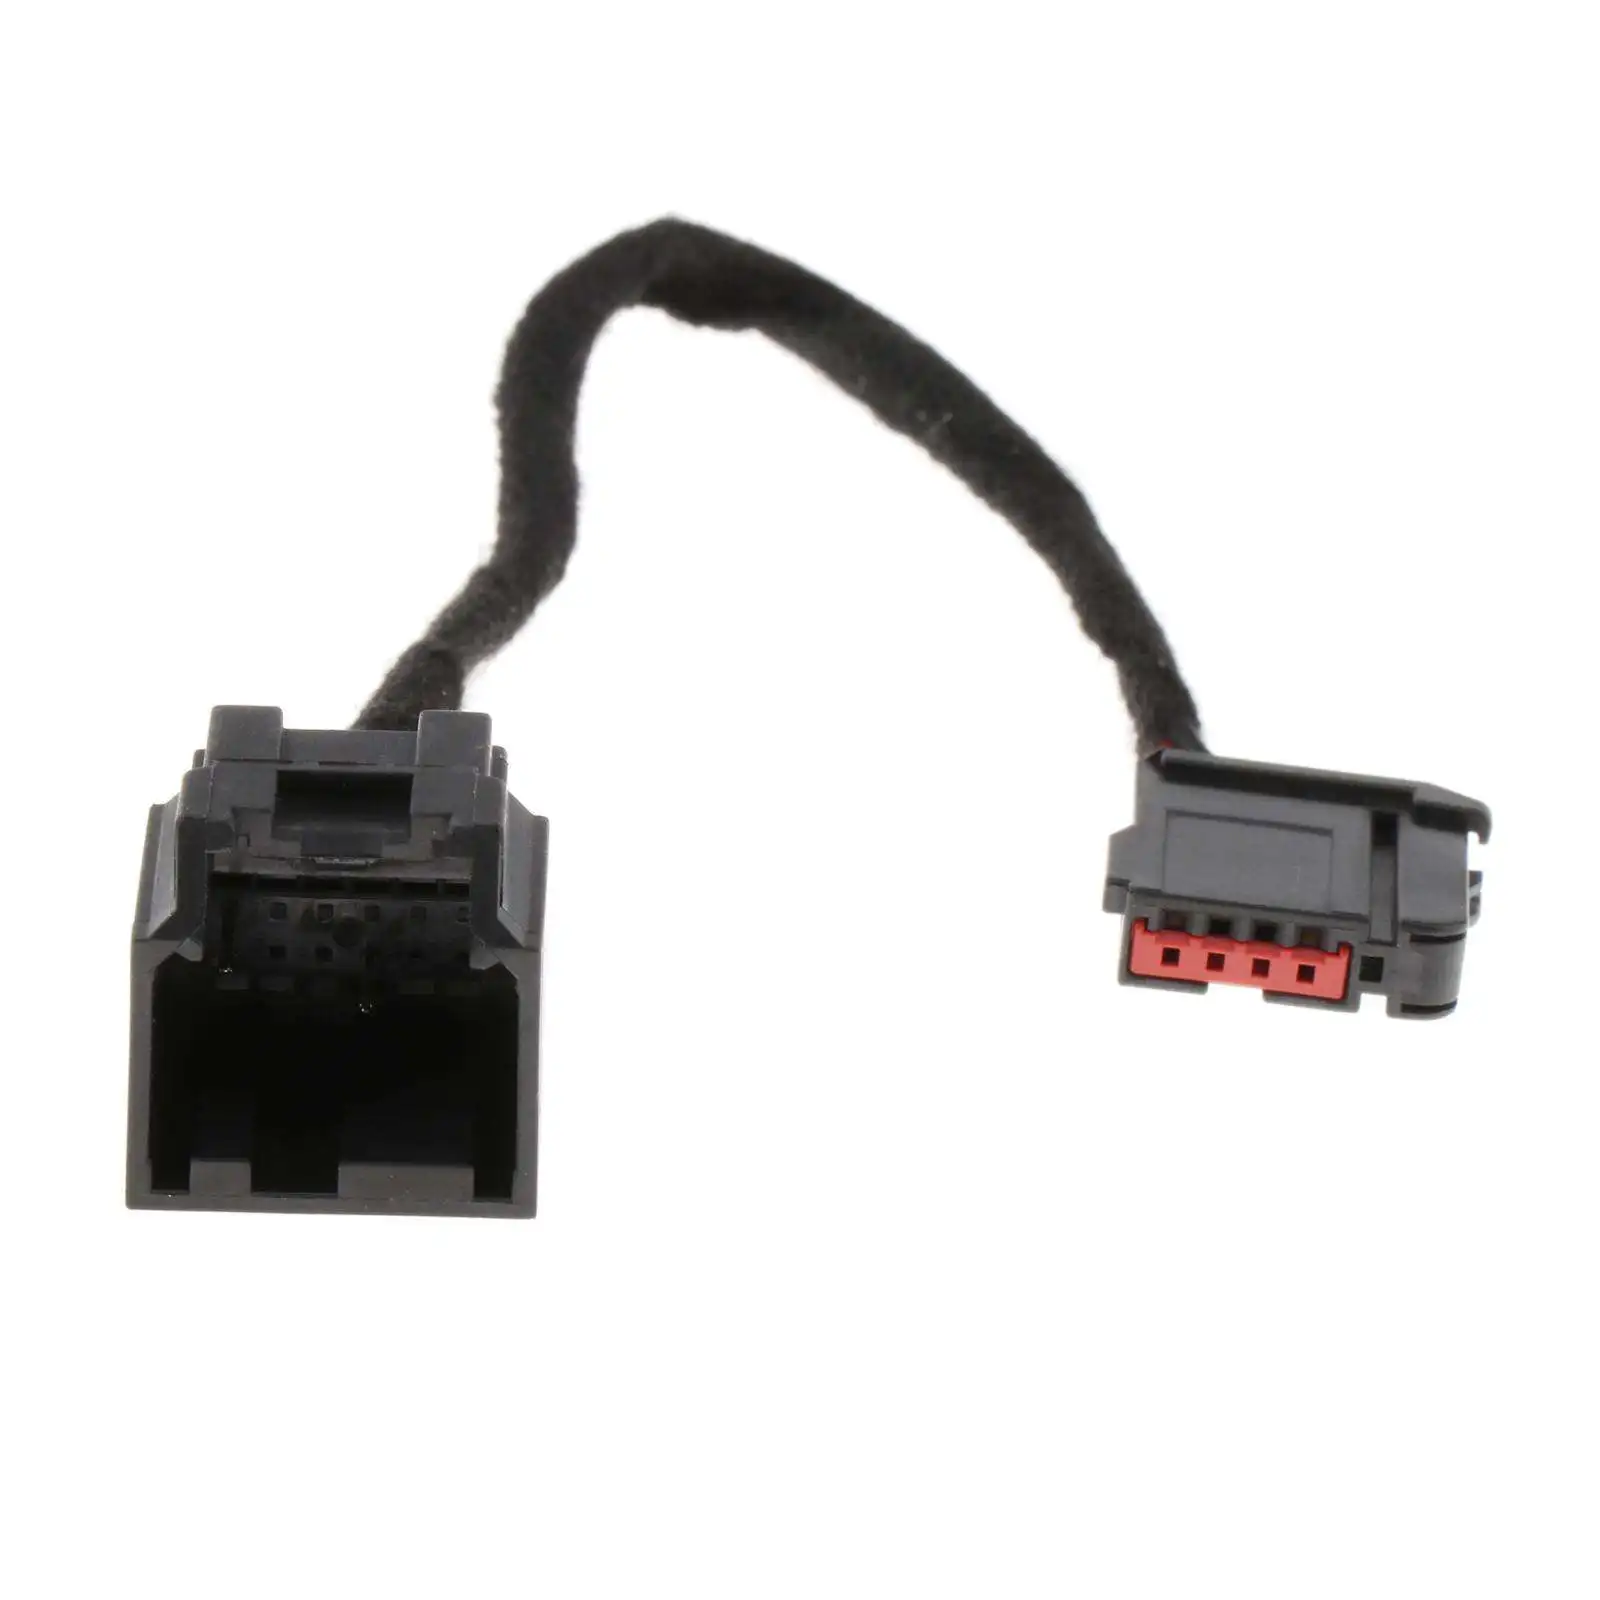 ABS Plastic Wiring Adapter GEN 1 for Ford SYNC 2 to SYNC 3 Retrofit USB Media HUB, Easy to Install, Direct Replacement